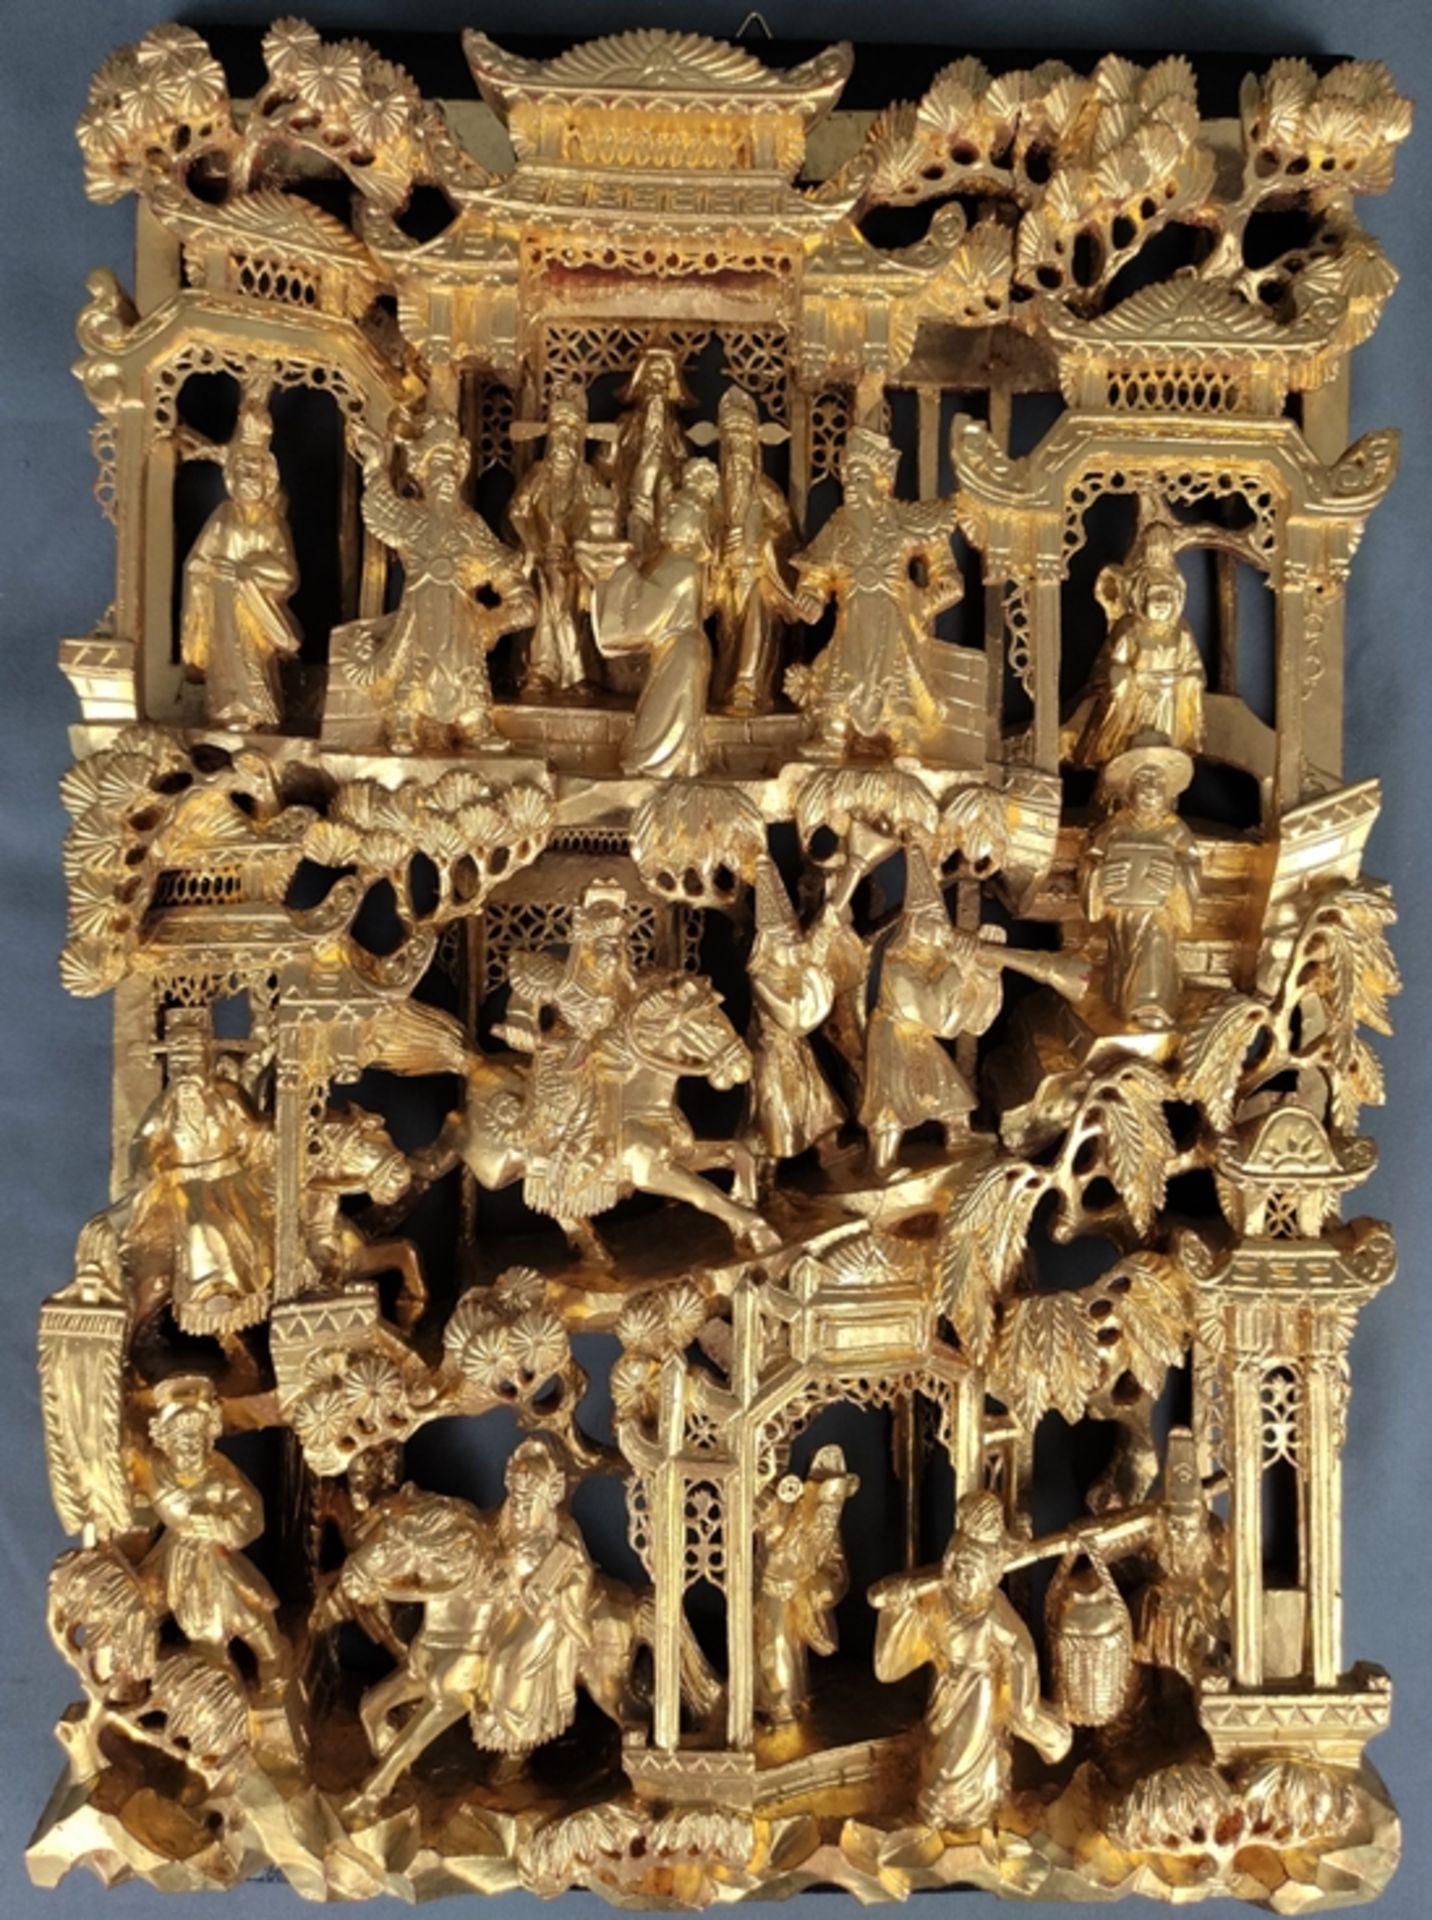 Chinese wall panel, elaborate carving with temple and parade scenes, gold plated wood, mid 20th cen